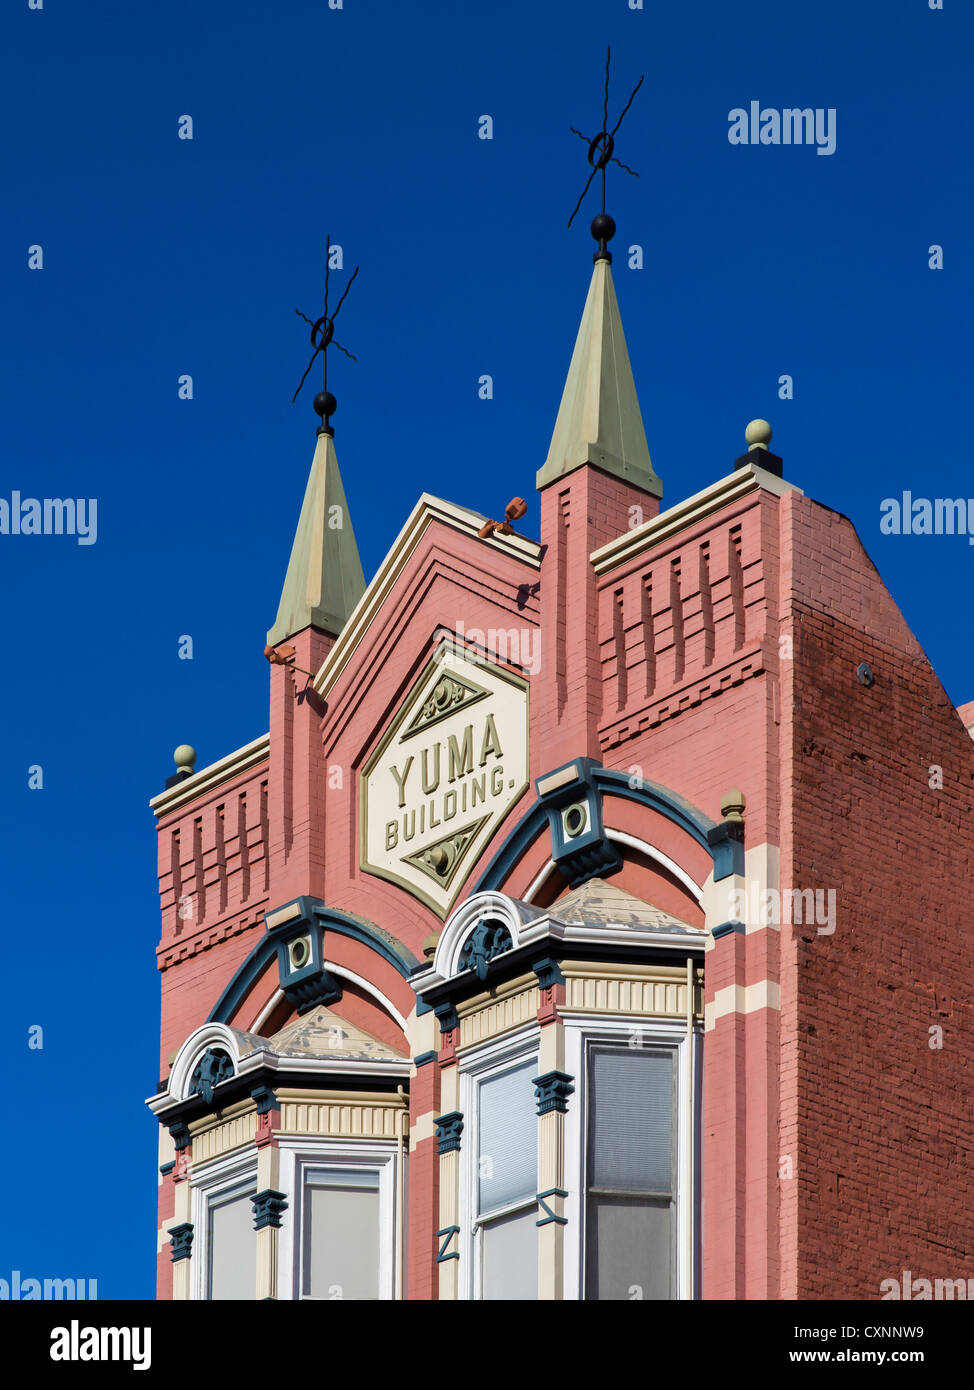 The Yuma Building in the Gaslamp Quarter Historic District, San Diego CA Stock Photo